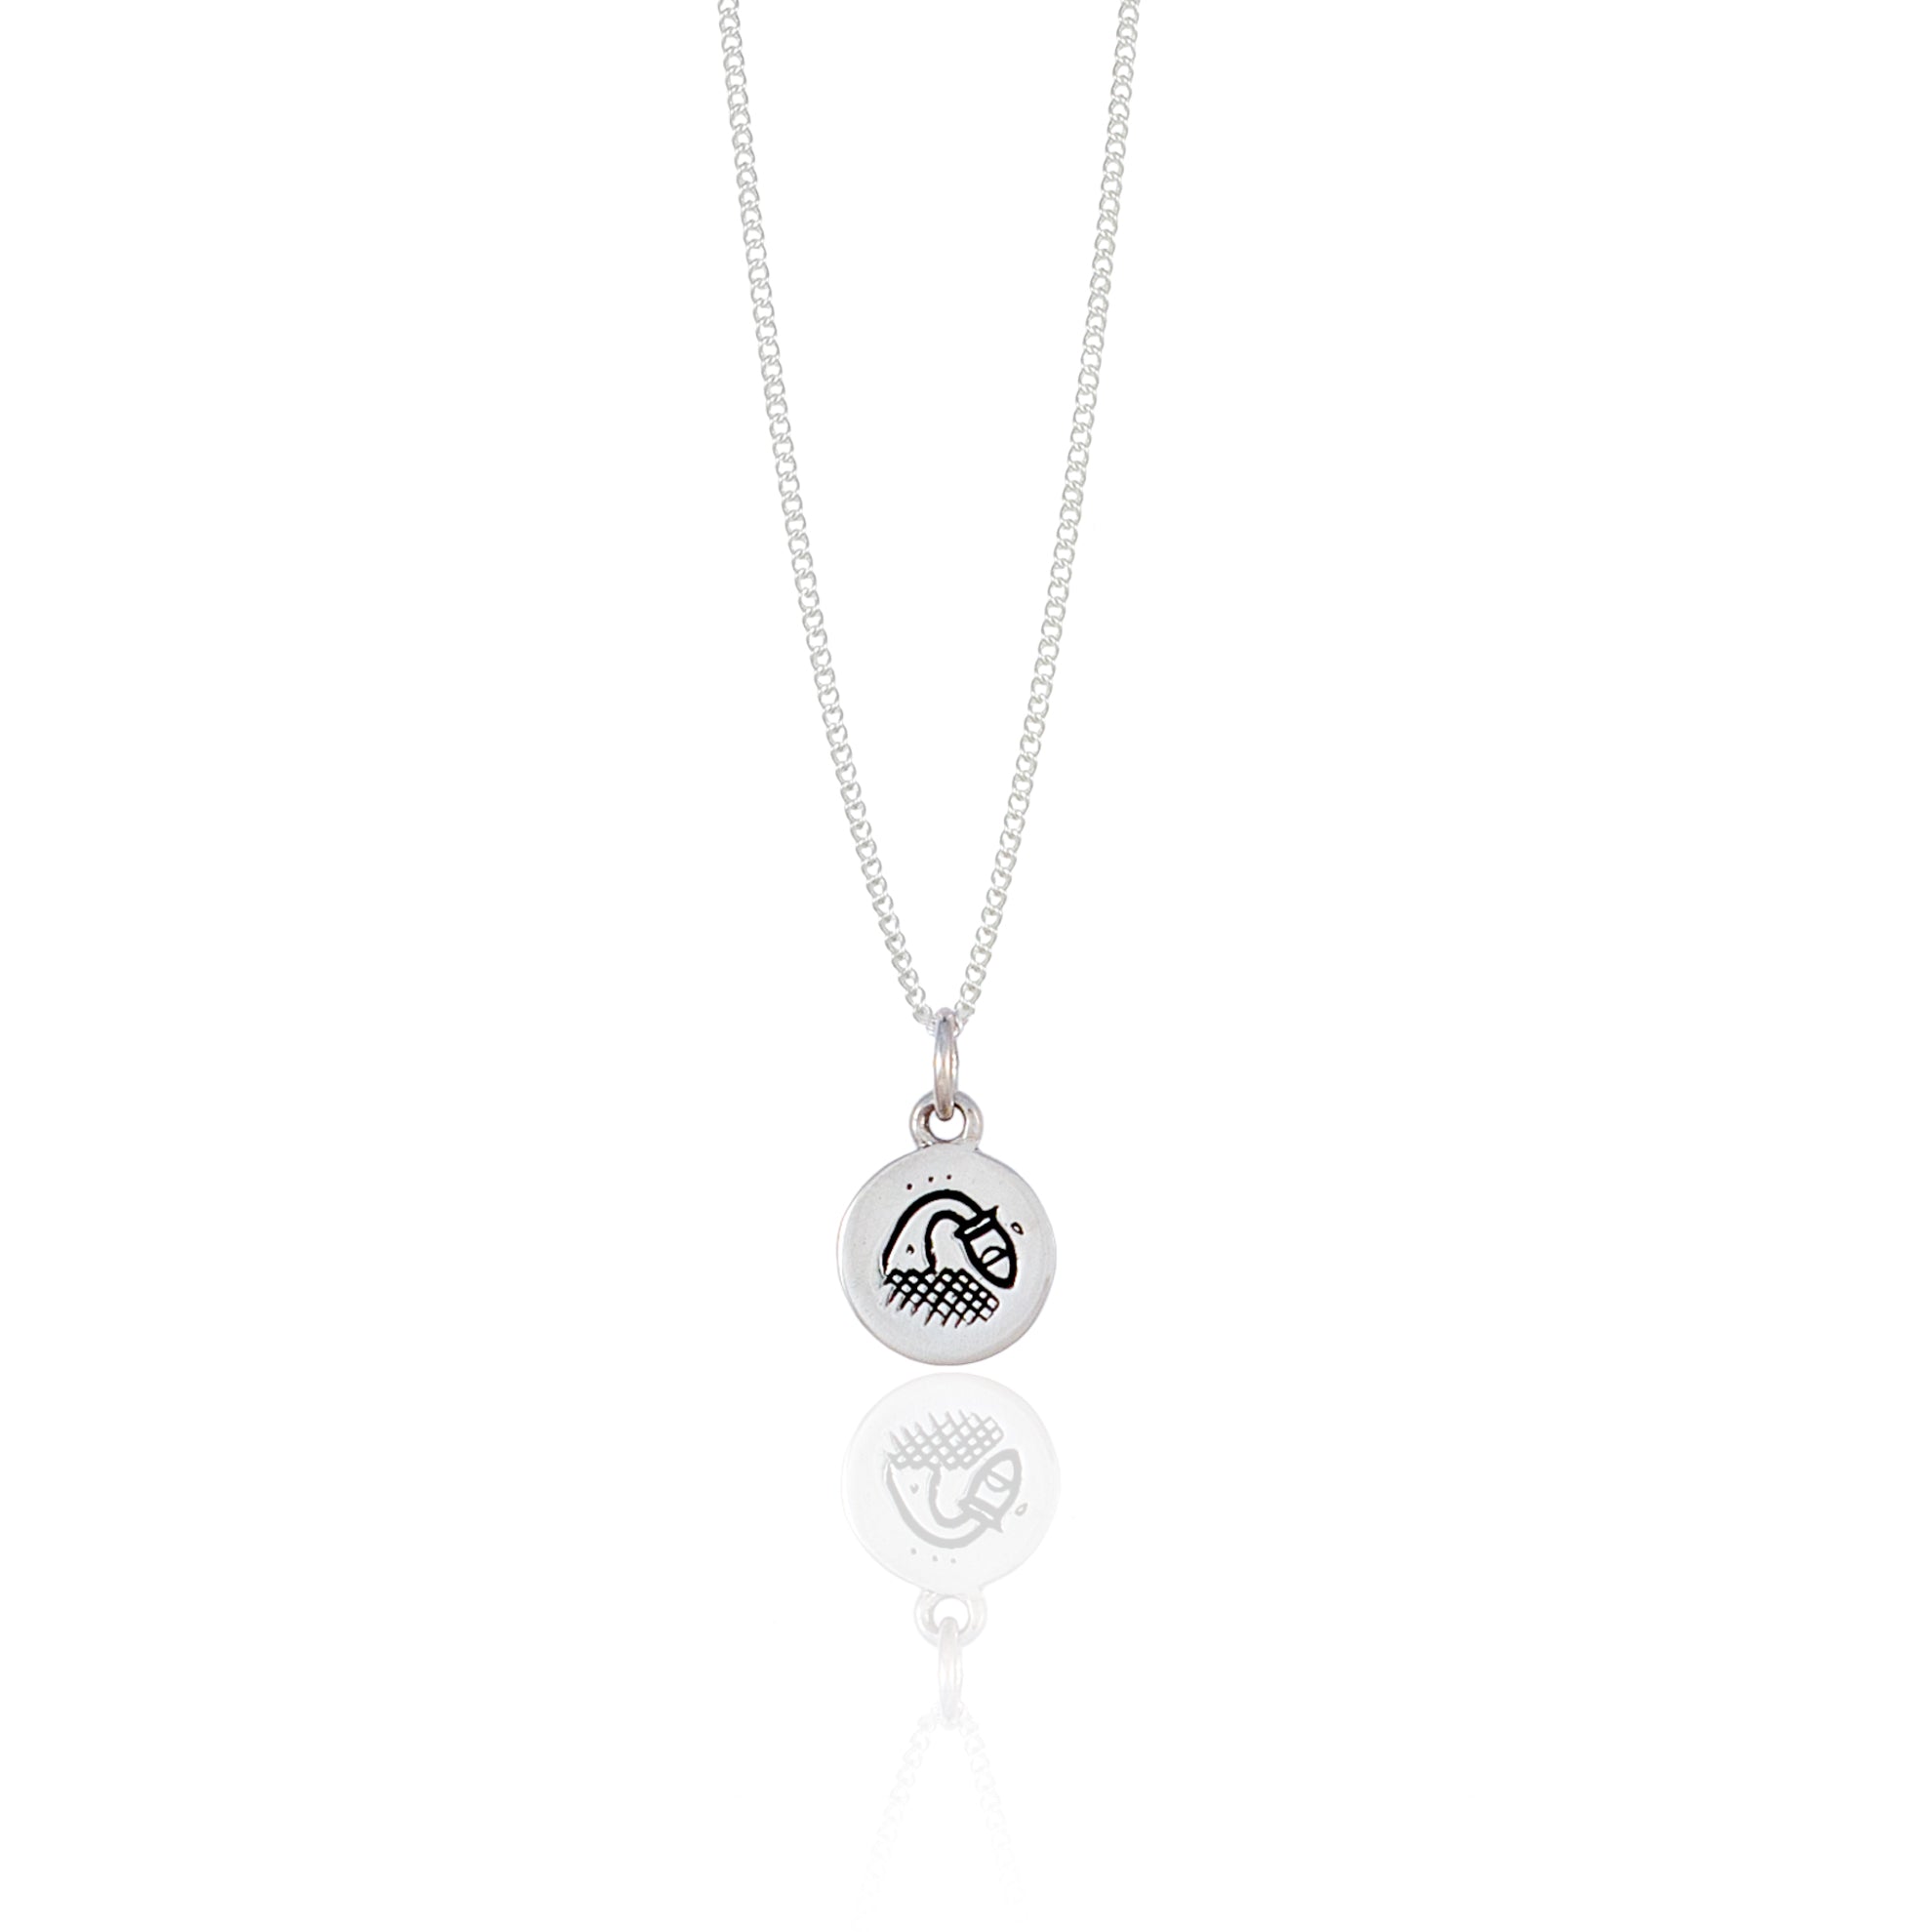 Reversible Aquarius Zodiac Sign Charm Coin Pendant Necklace in Sterlin |  Takar Jewelry